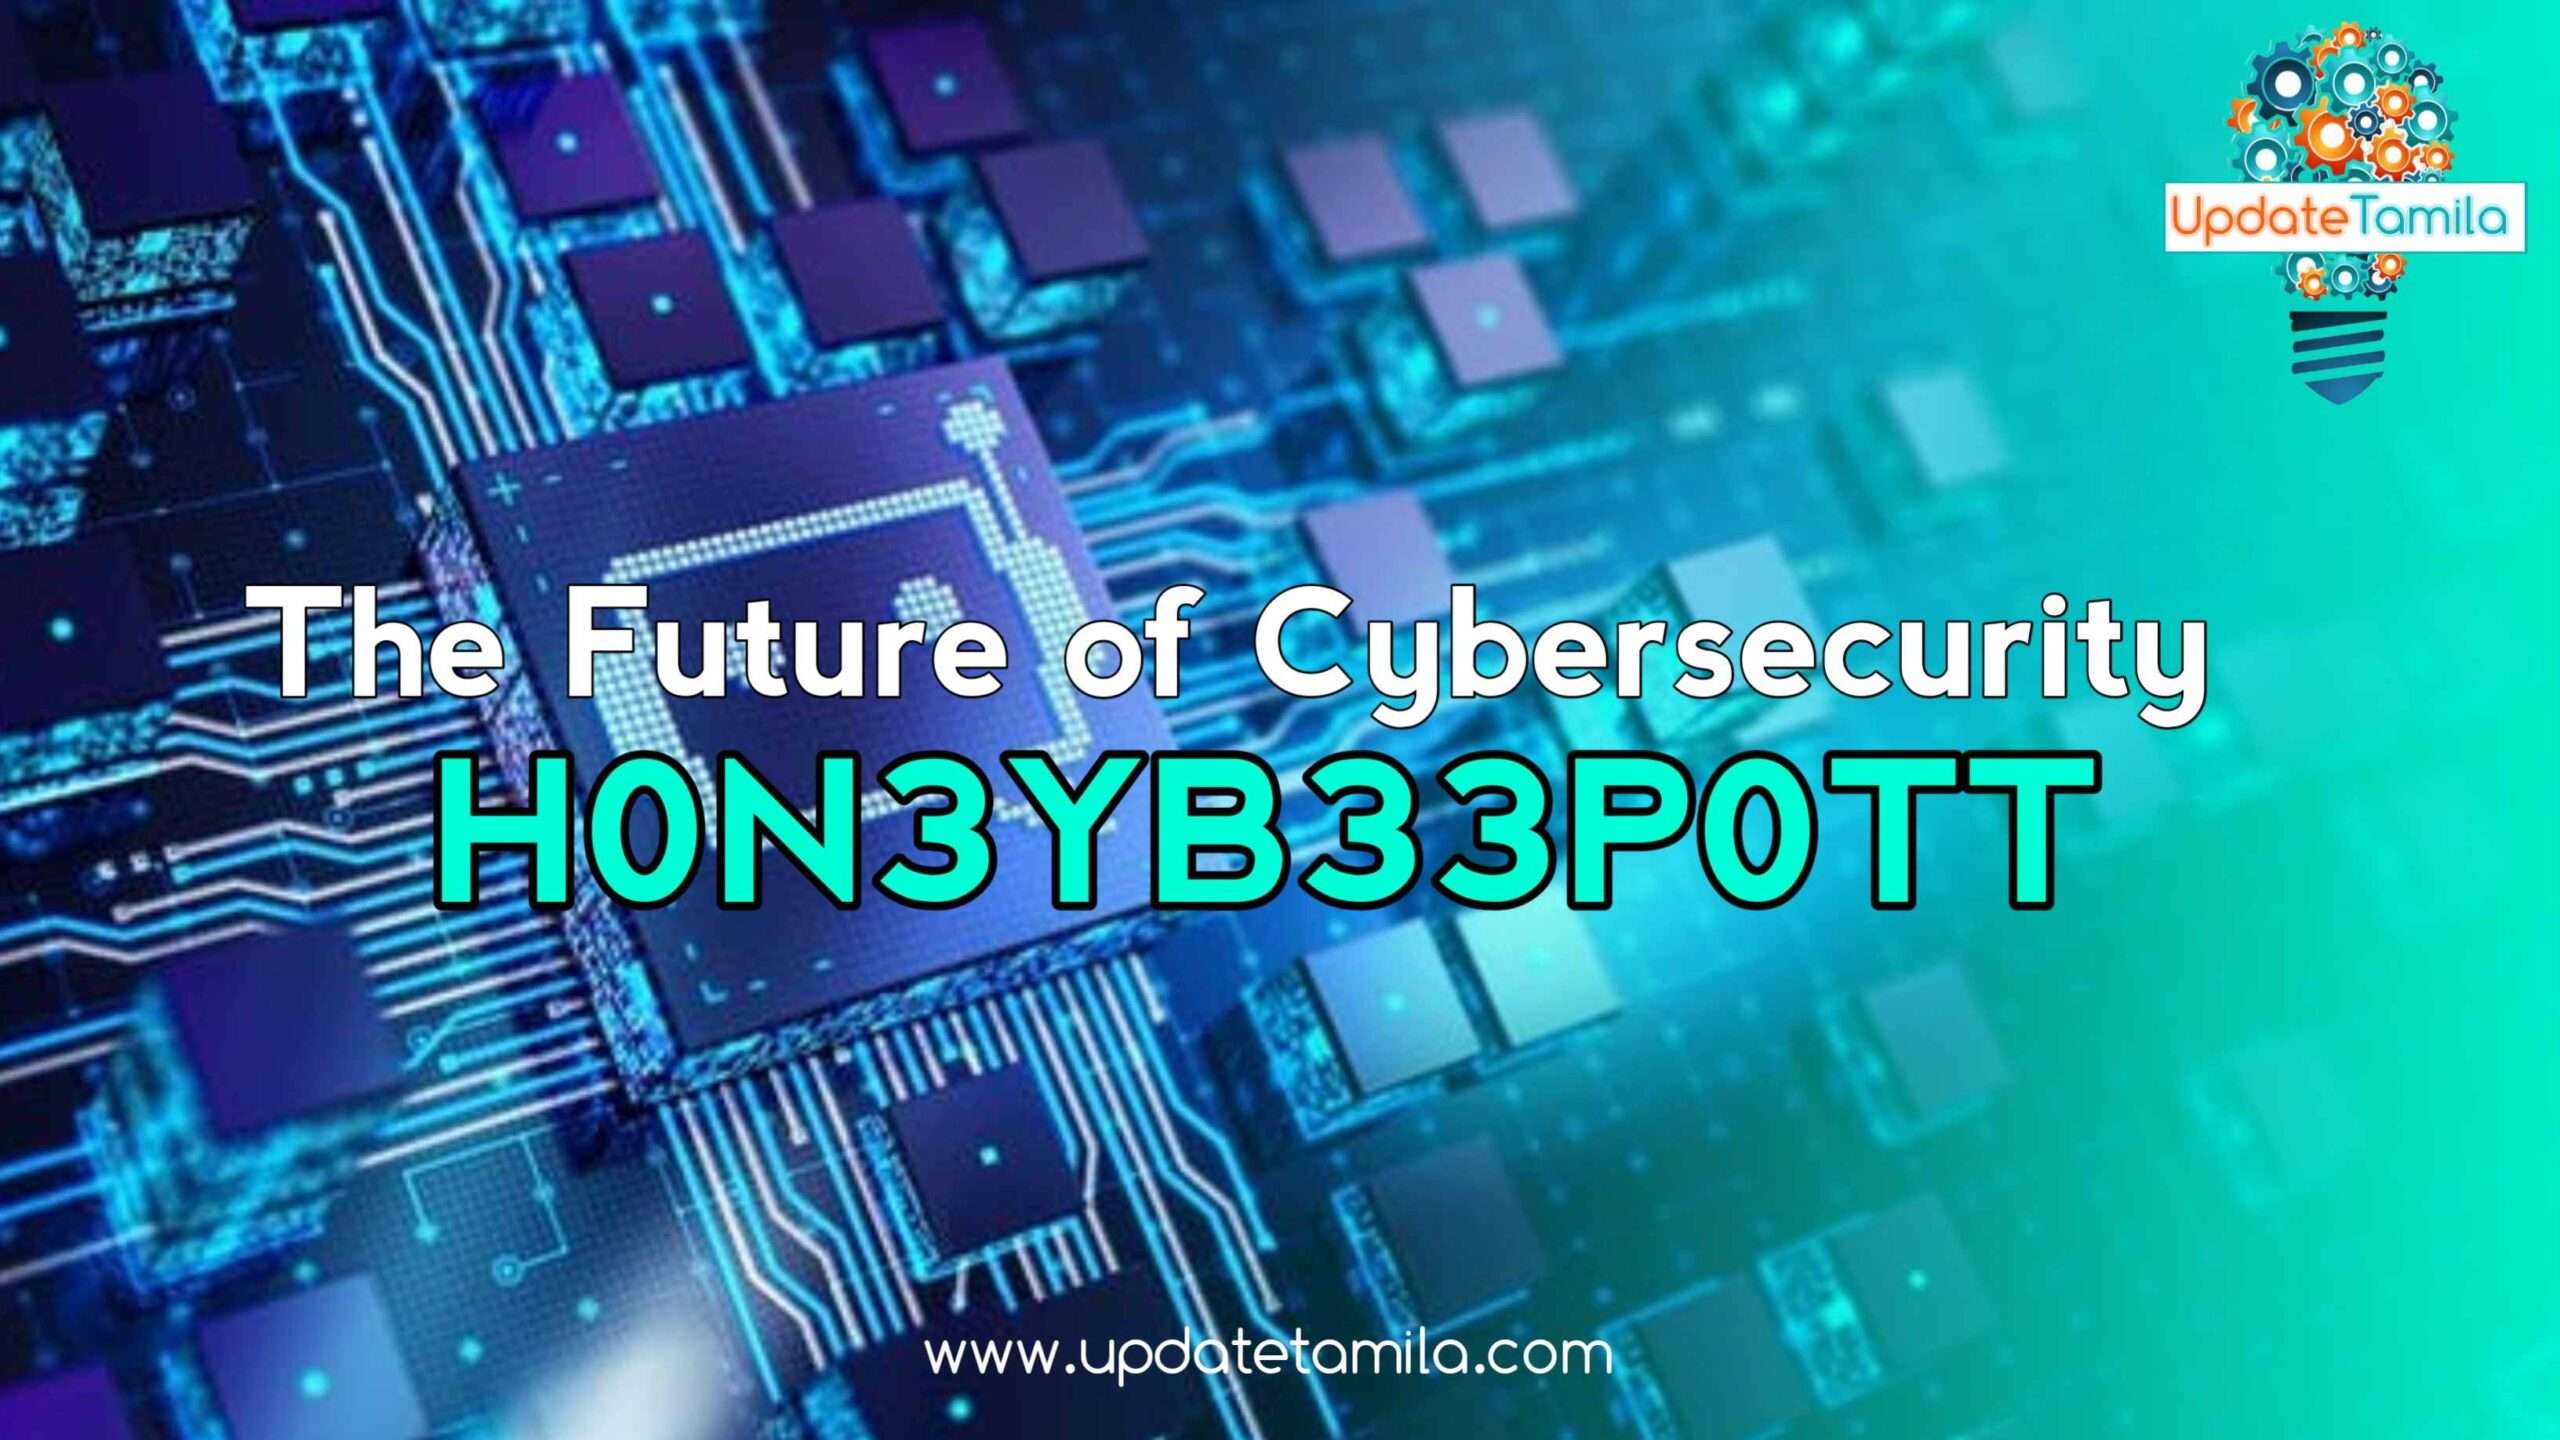 The Future of Cybersecurity with H0N3YB33P0TT